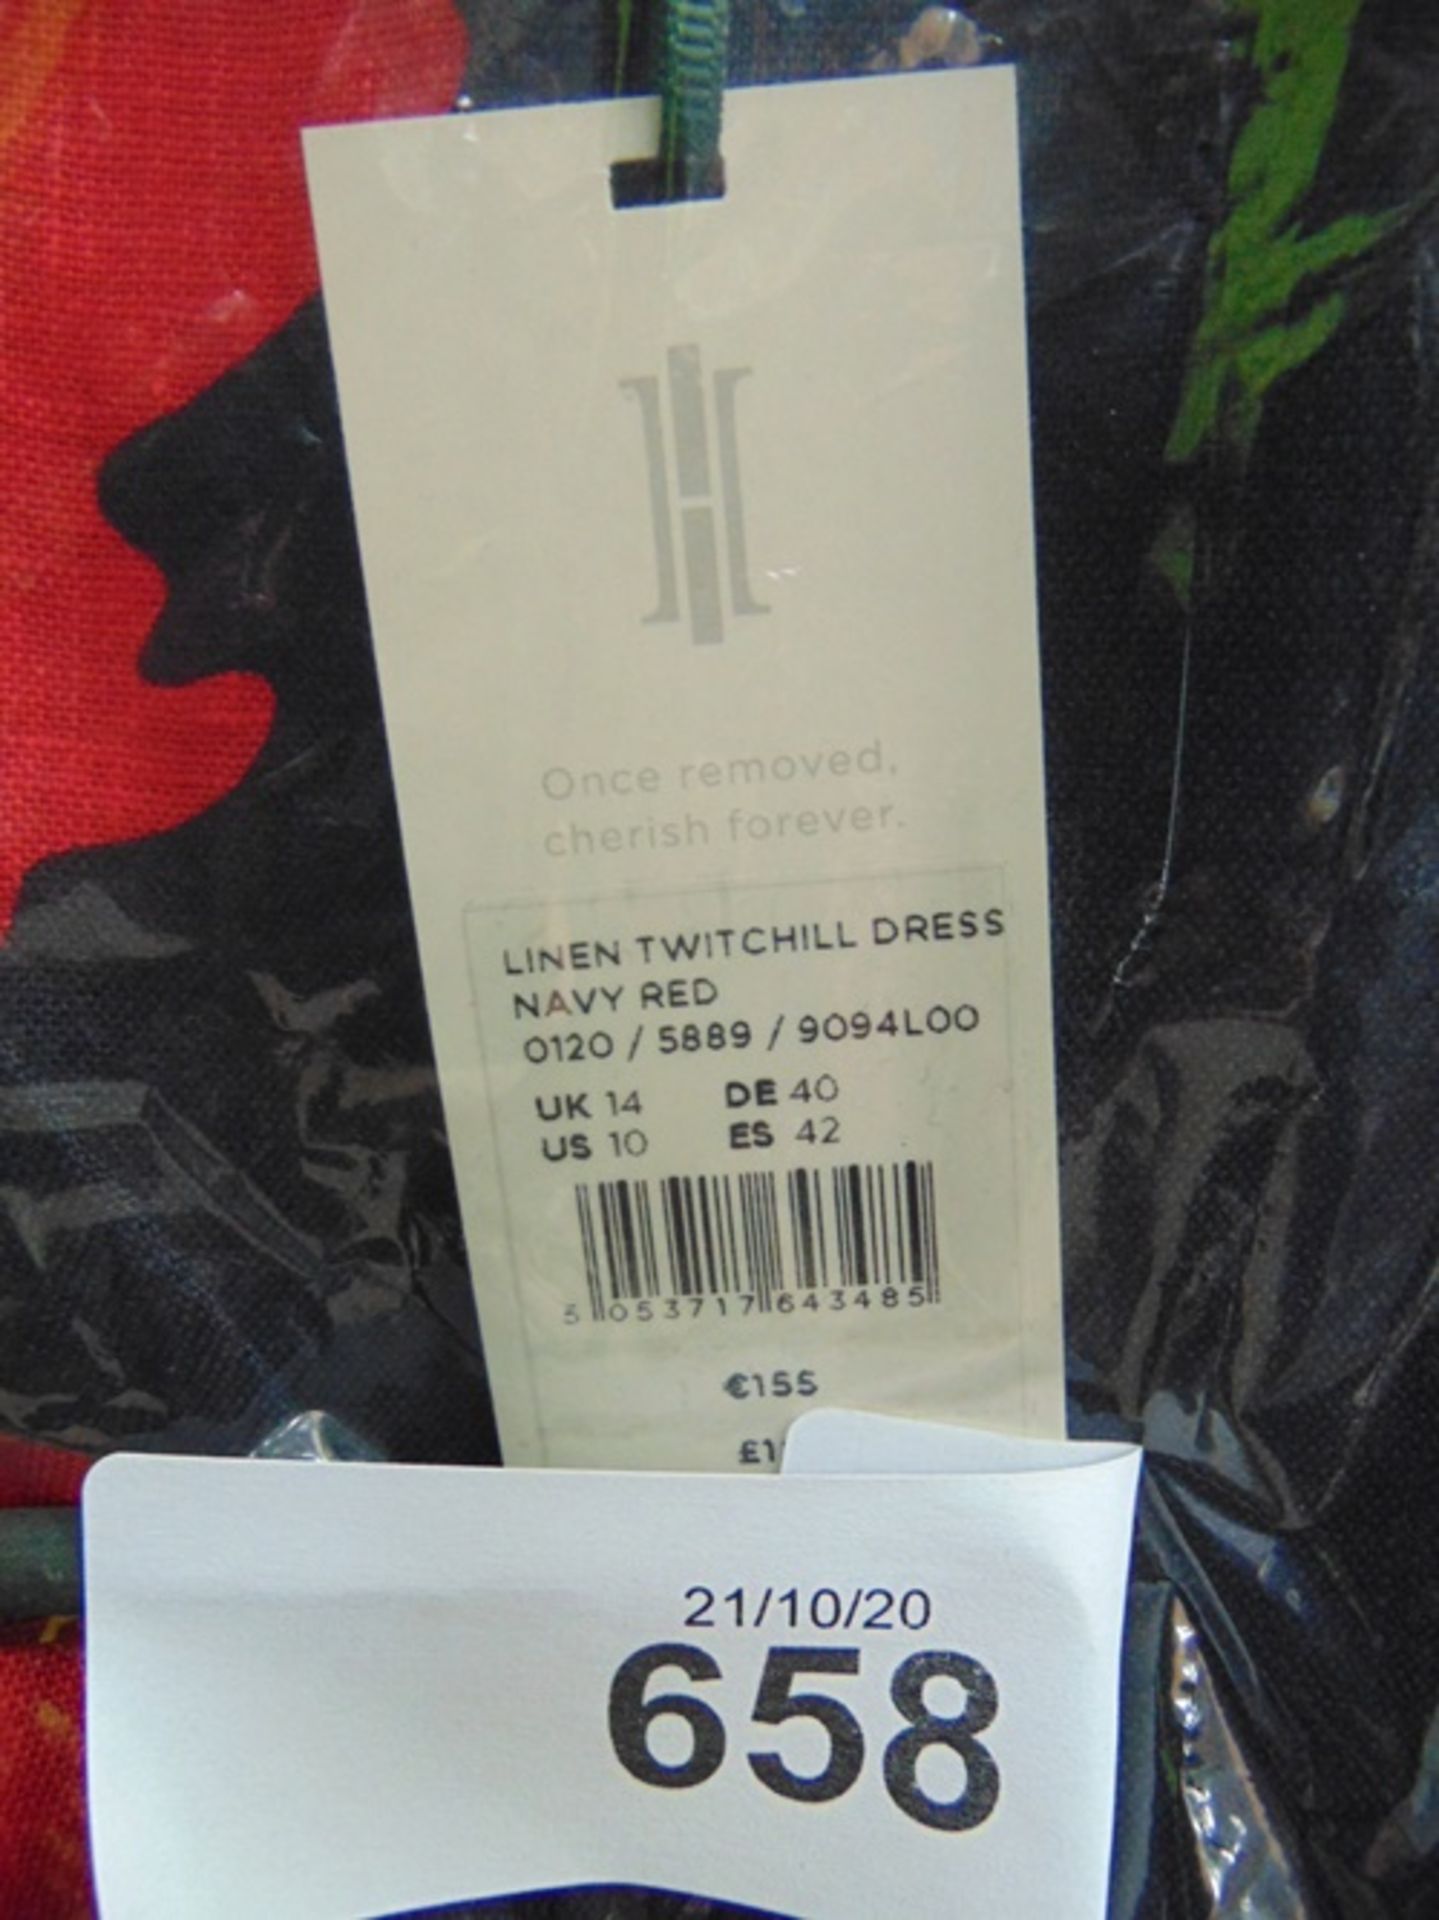 2 x Hobbs Twitchill linen dresses, size 18 & 14, red and black, RRP £129.00 - New (ES16B) - Image 3 of 3